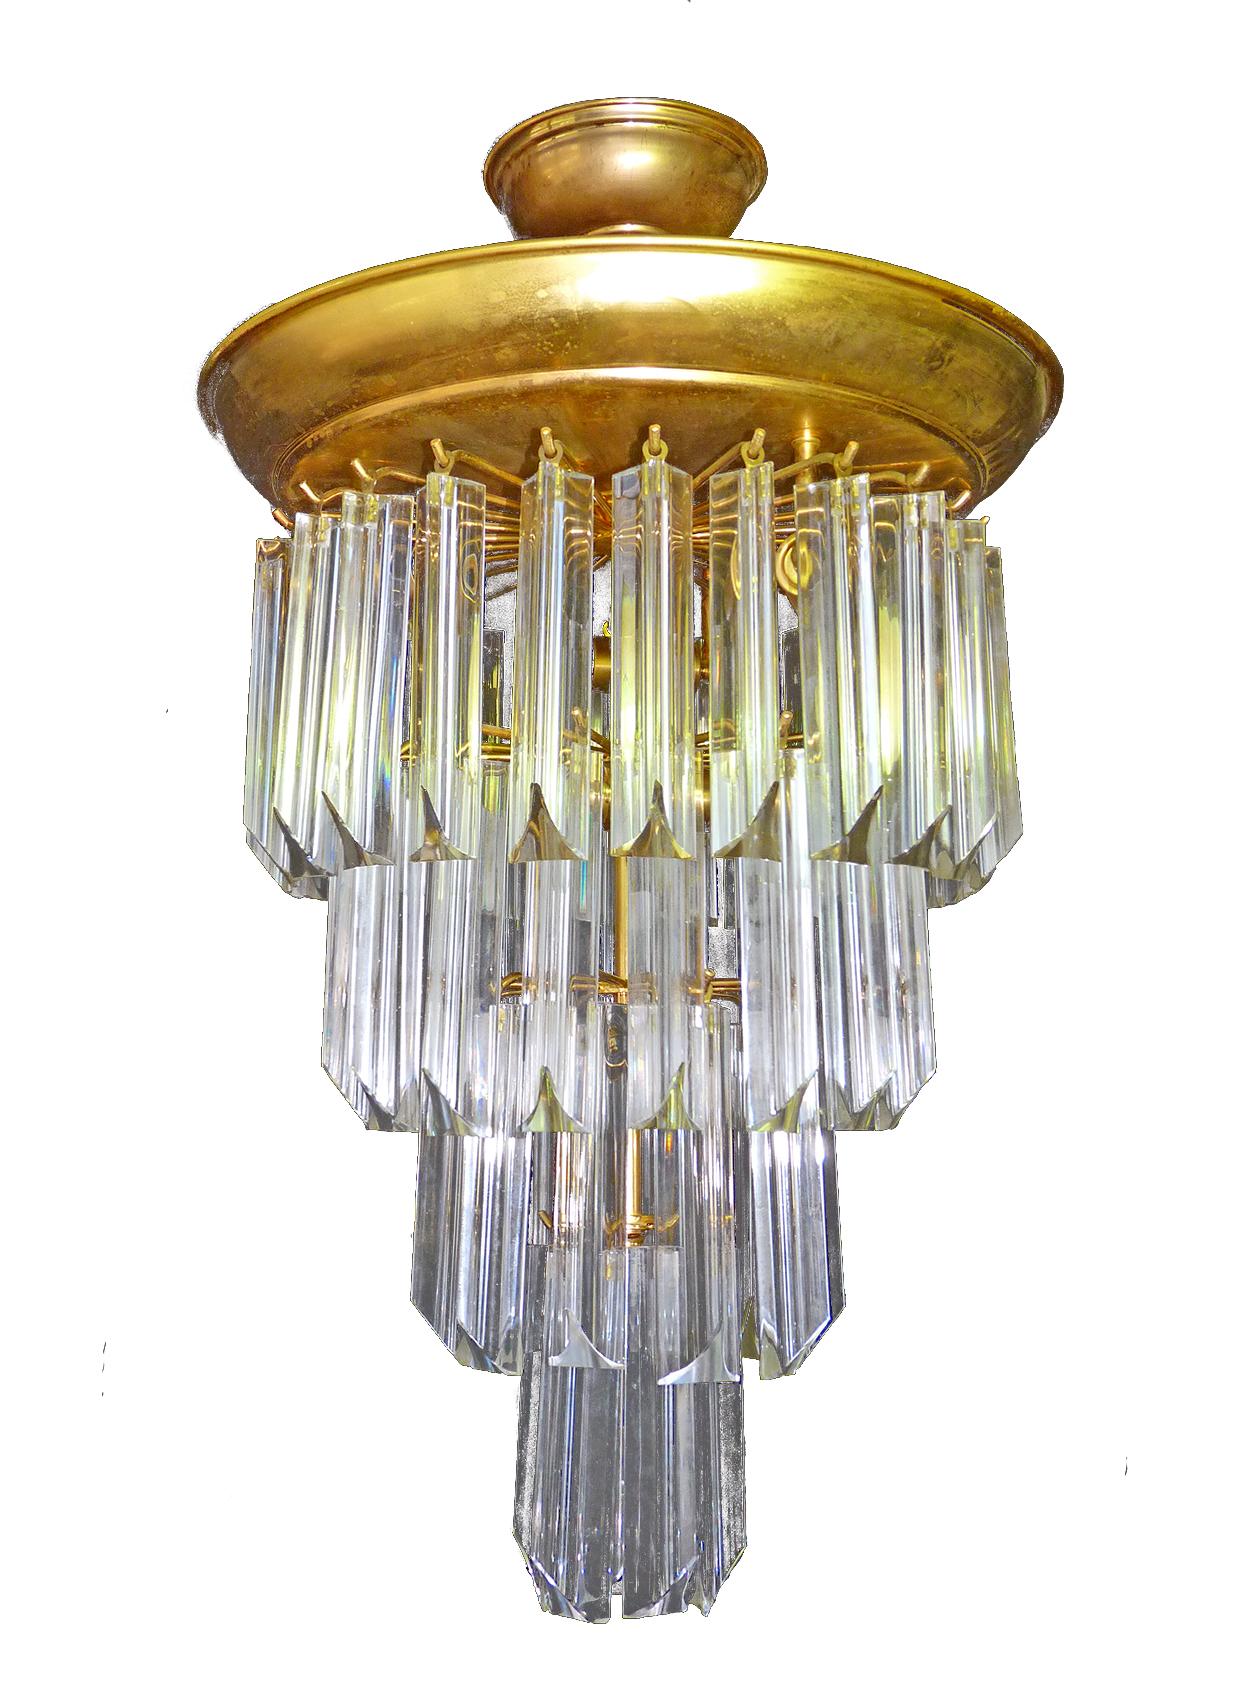 5-light bulbs E27/ good working condition
Assembly required. Bulbs not included.
Disassembled for shipping.
Measures:
Diameter 16 in/ 40 cm
Height 30 in (24 in and 6 in/chain)/ 75 cm (60 cm and 15 cm/chain)
Weight: 18 lb/8 Kg.
 